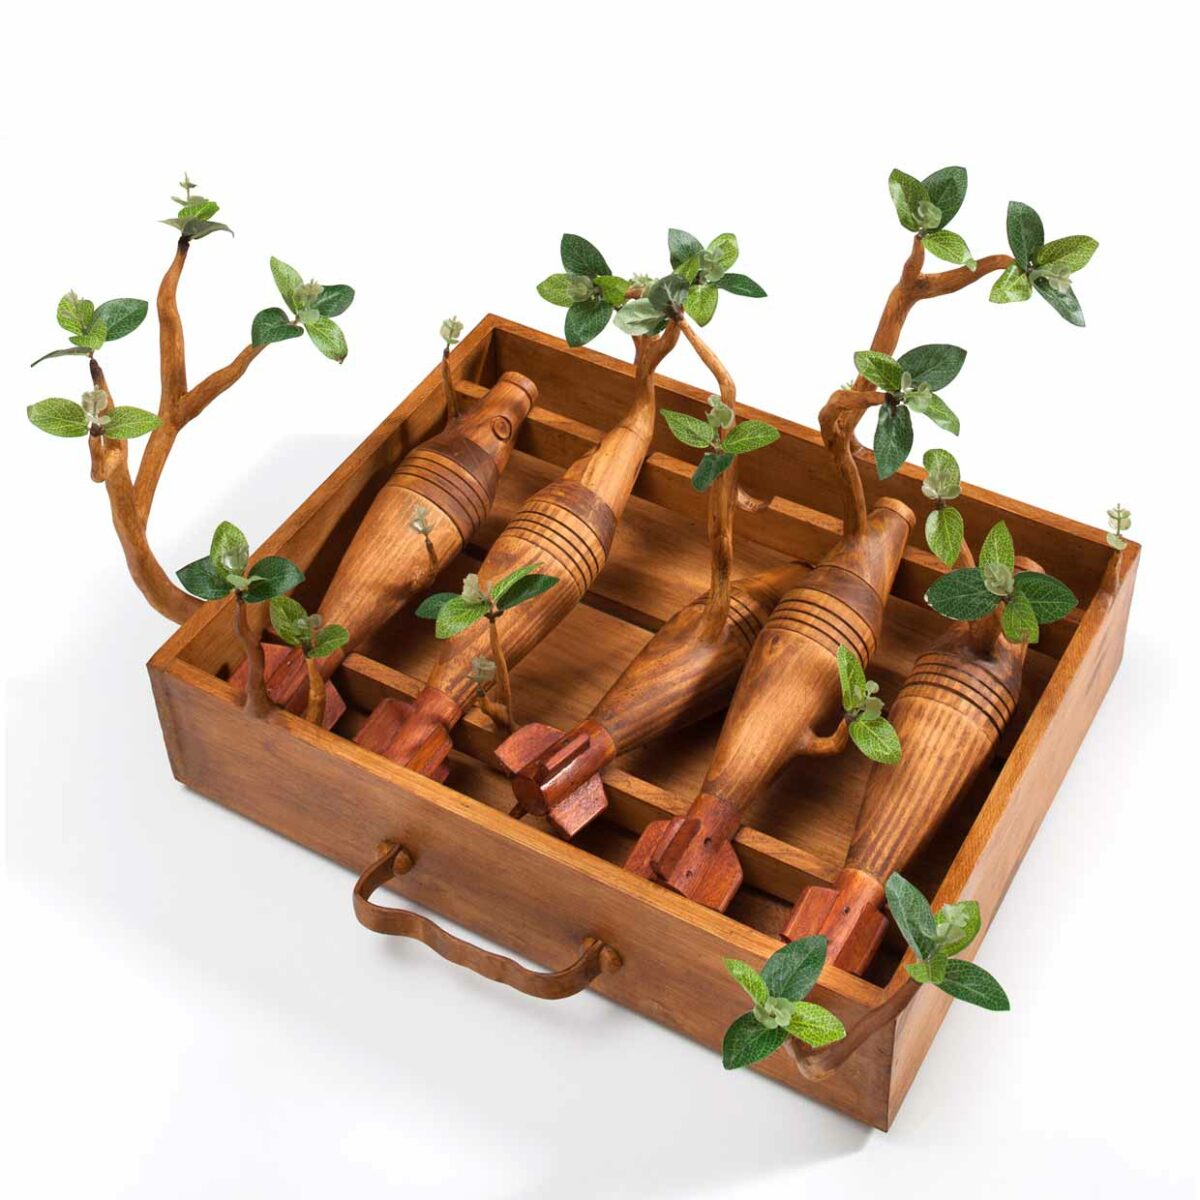 Art And Nature Humorous Wooden Sculptures With Sprouted Wooden Limbs By Camille Kachani 12